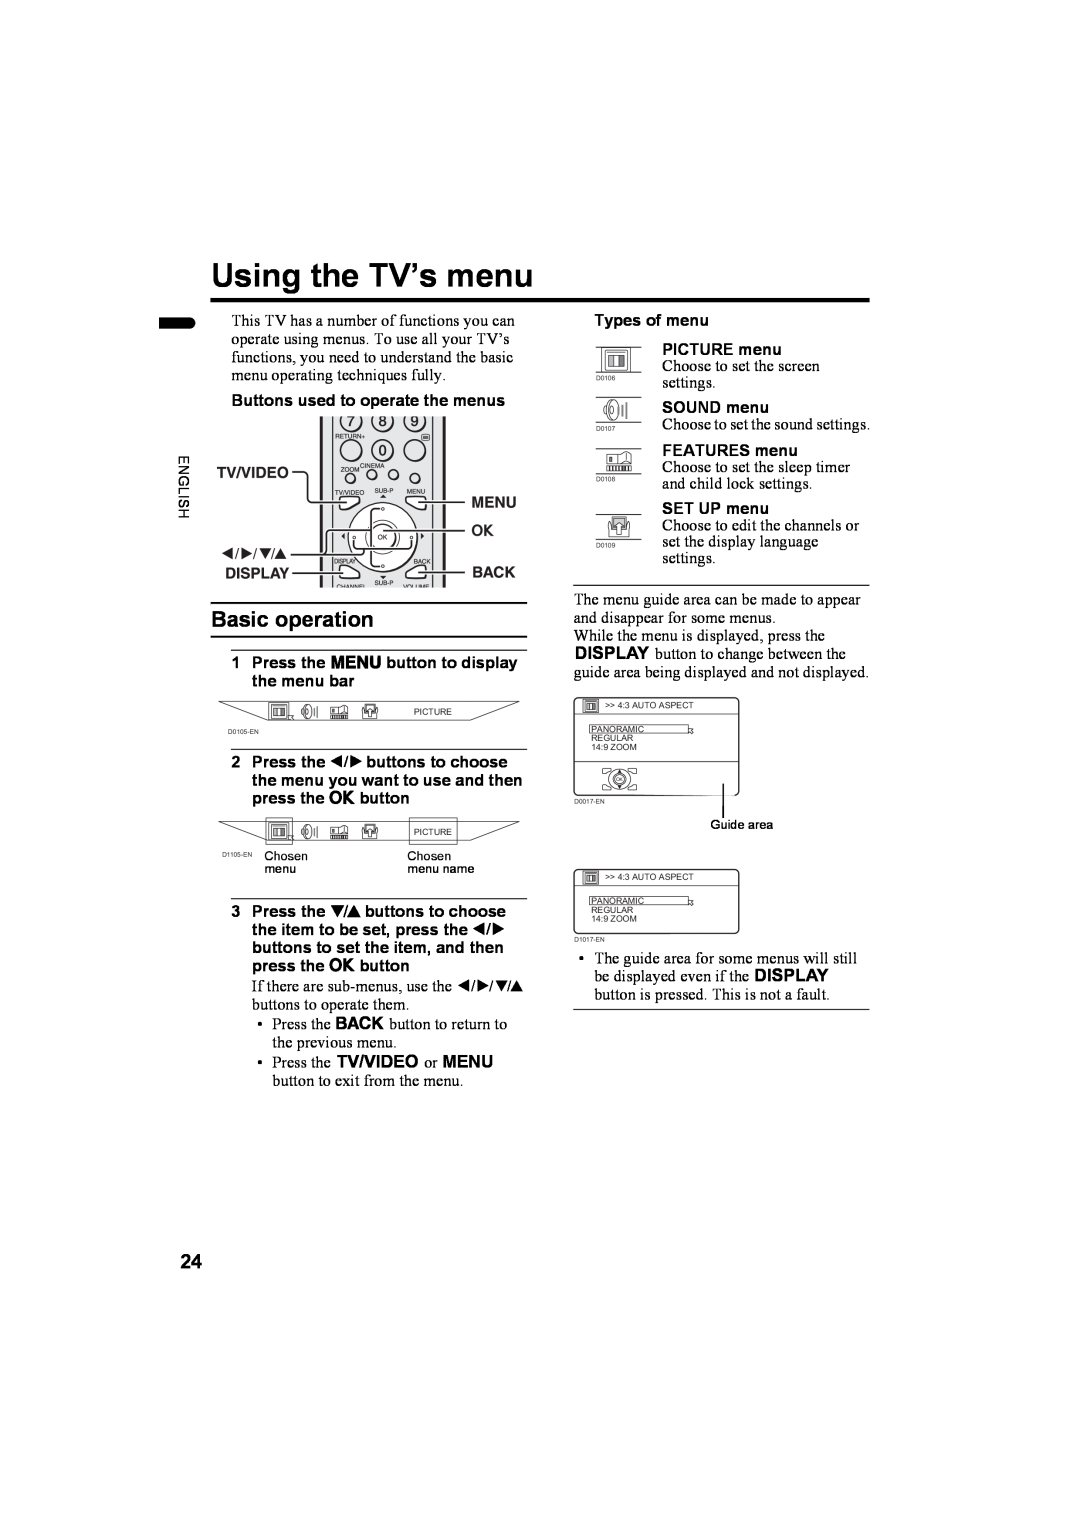 JVC 1004MKH-CR-VP Using the TV’s menu, Buttons used to operate the menus, Types of menu, Basic operation, PICTURE menu 